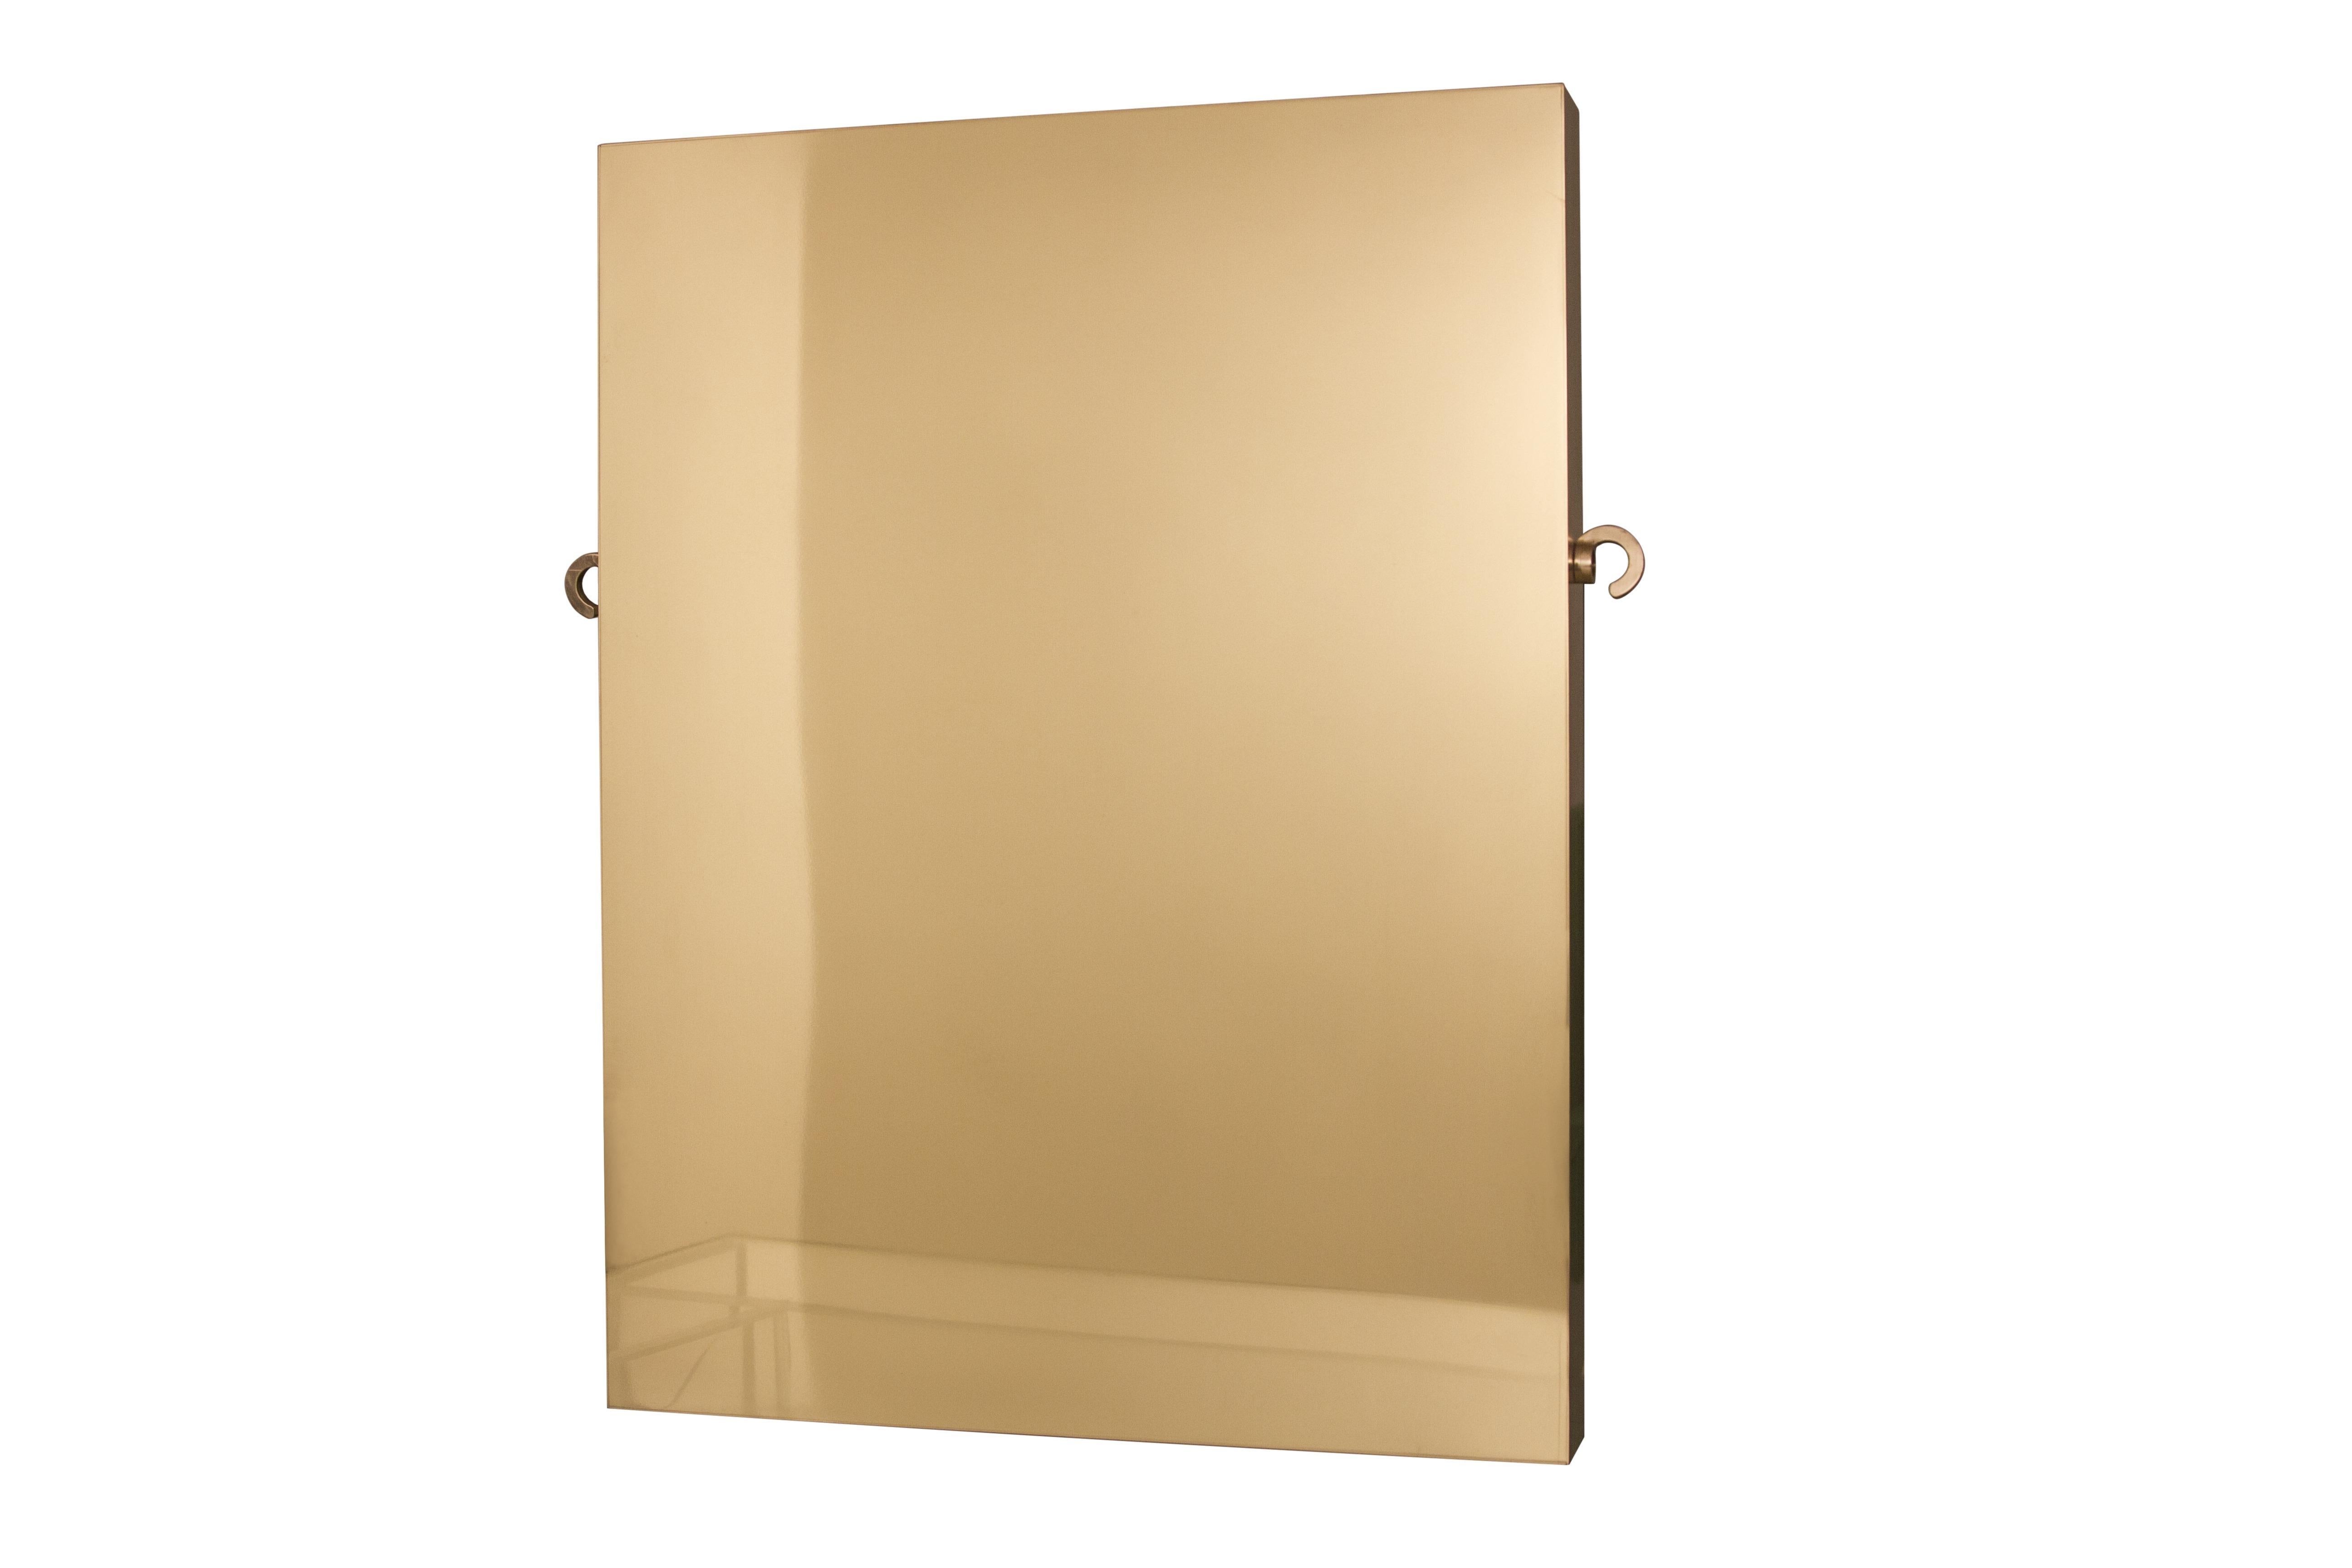 The quintessential polished brass mirror. It's as simple and beautiful as that.